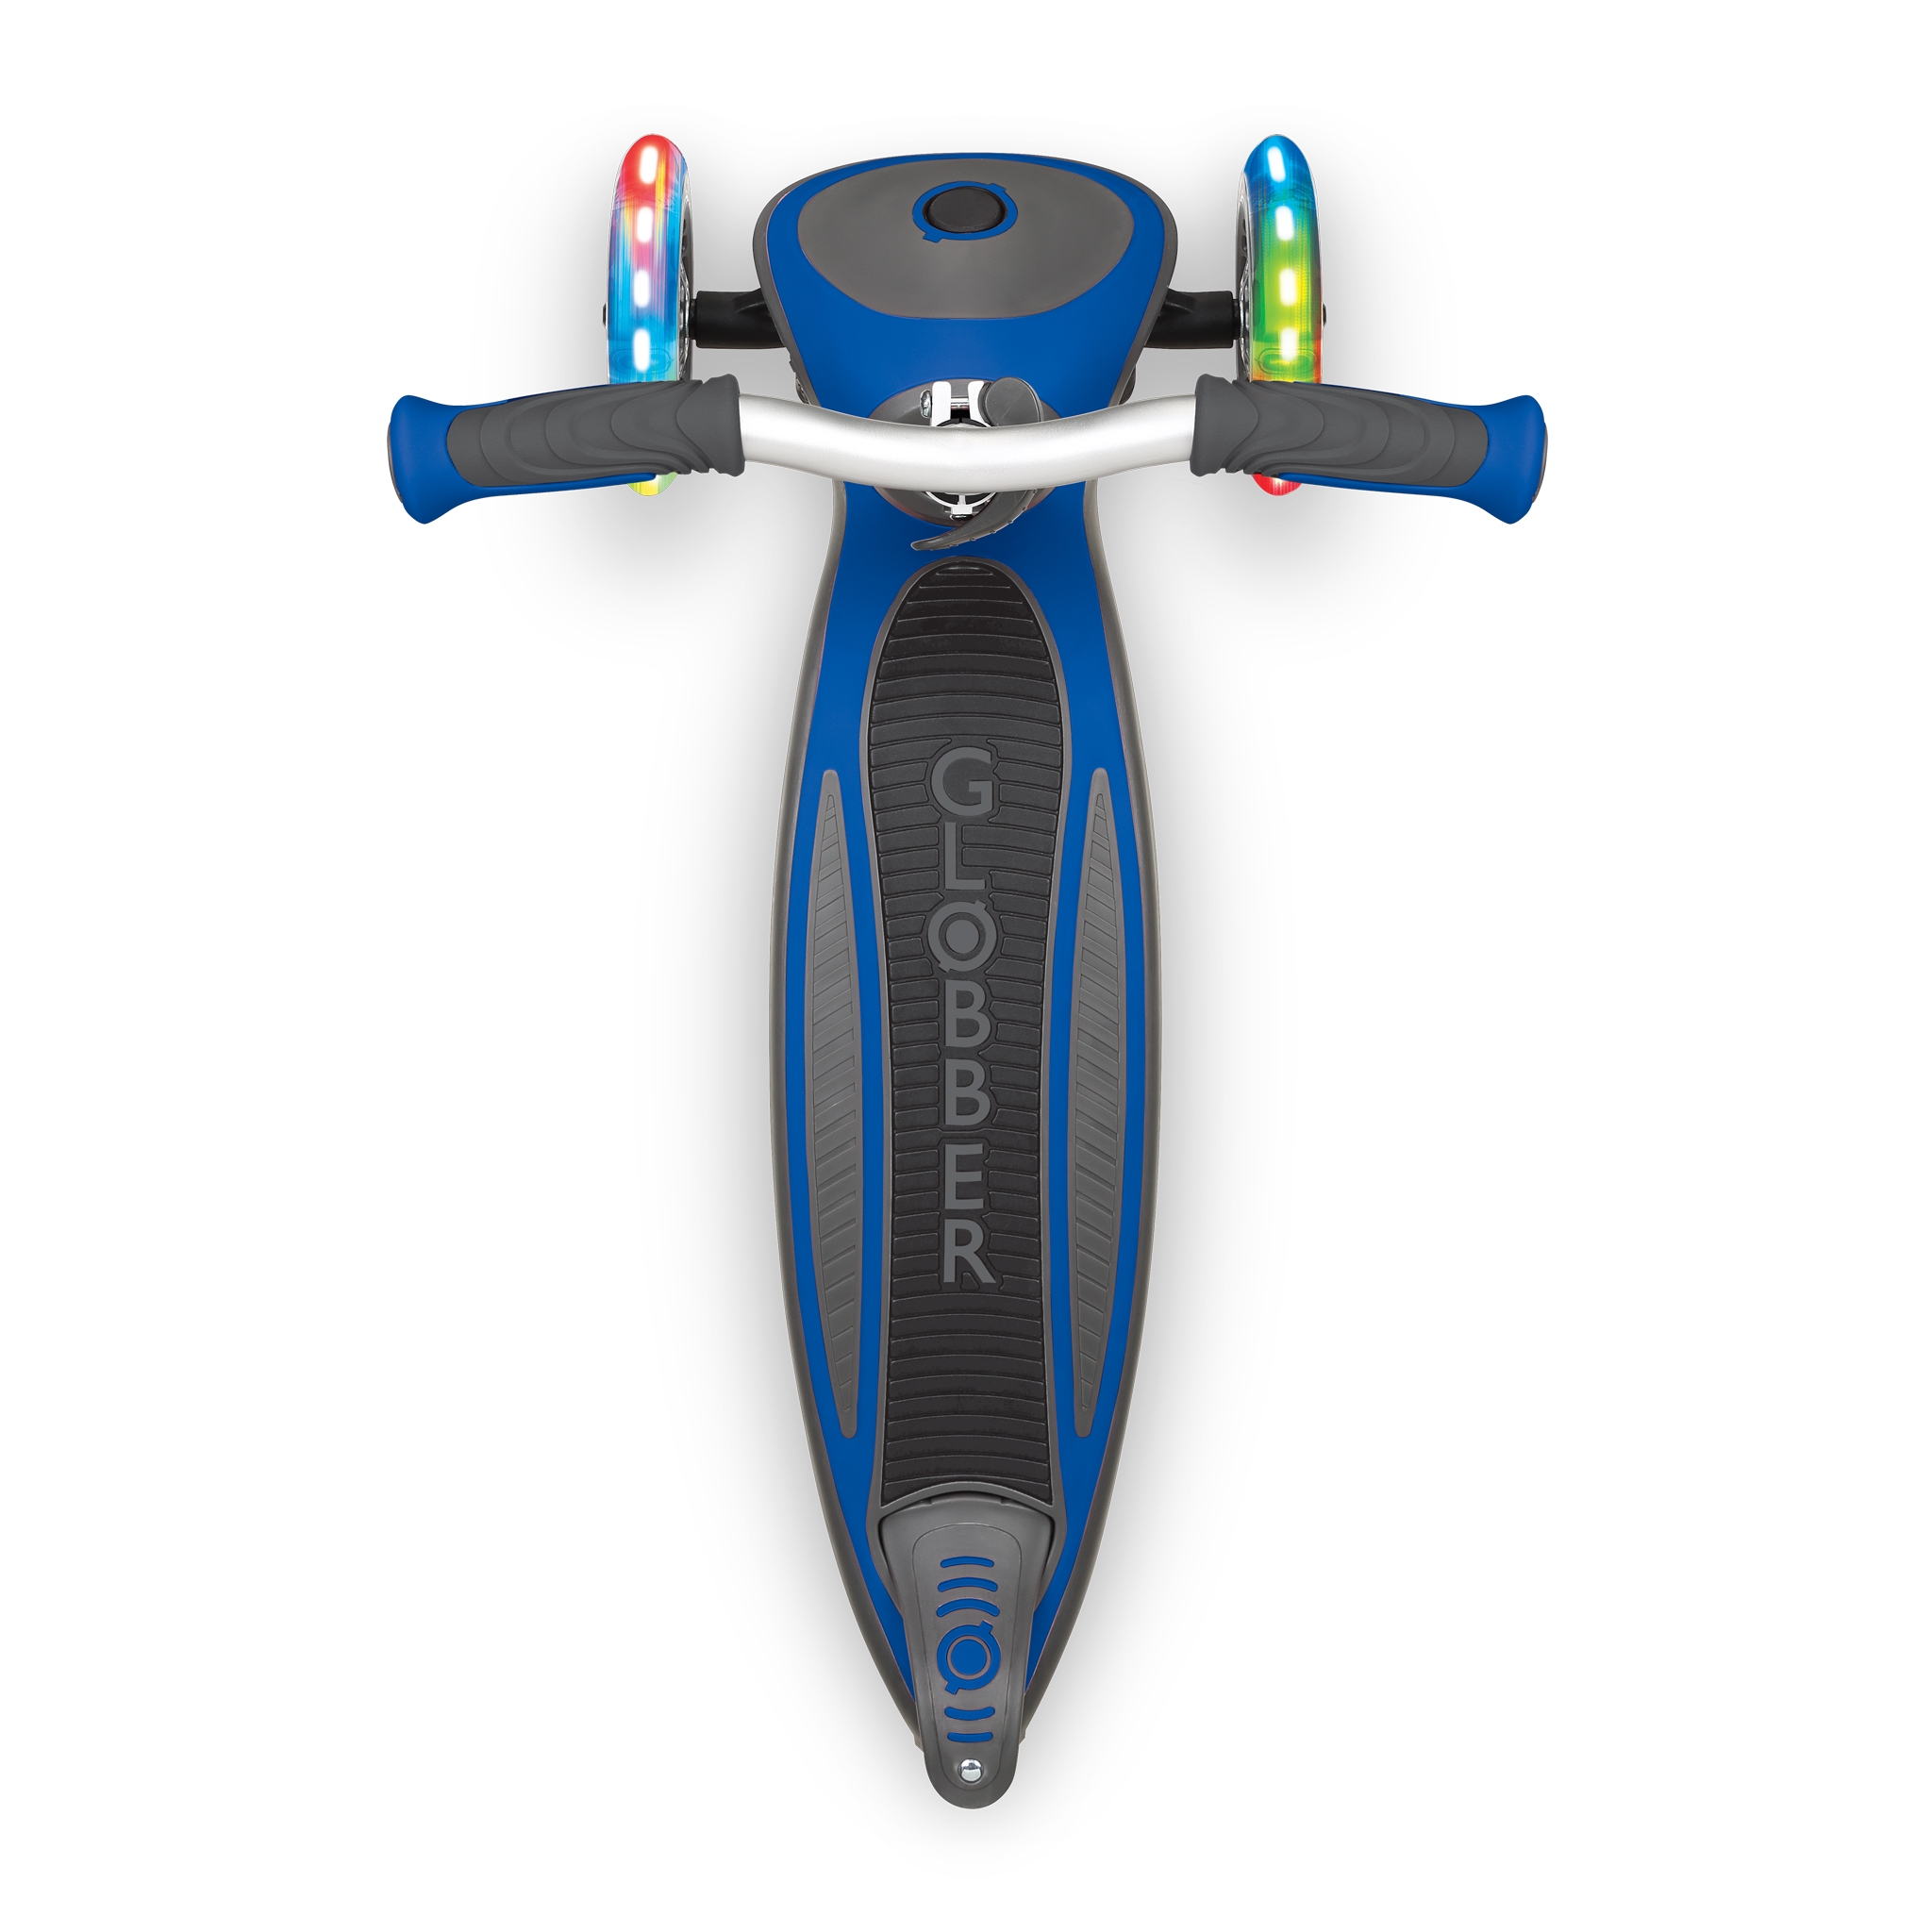 Globber-MASTER-LIGHTS-3-wheel-foldable-light-up-scooter-for-kids-with-extra-wide-anti-slip-deck-for-comfortable-rides_dark-blue 0